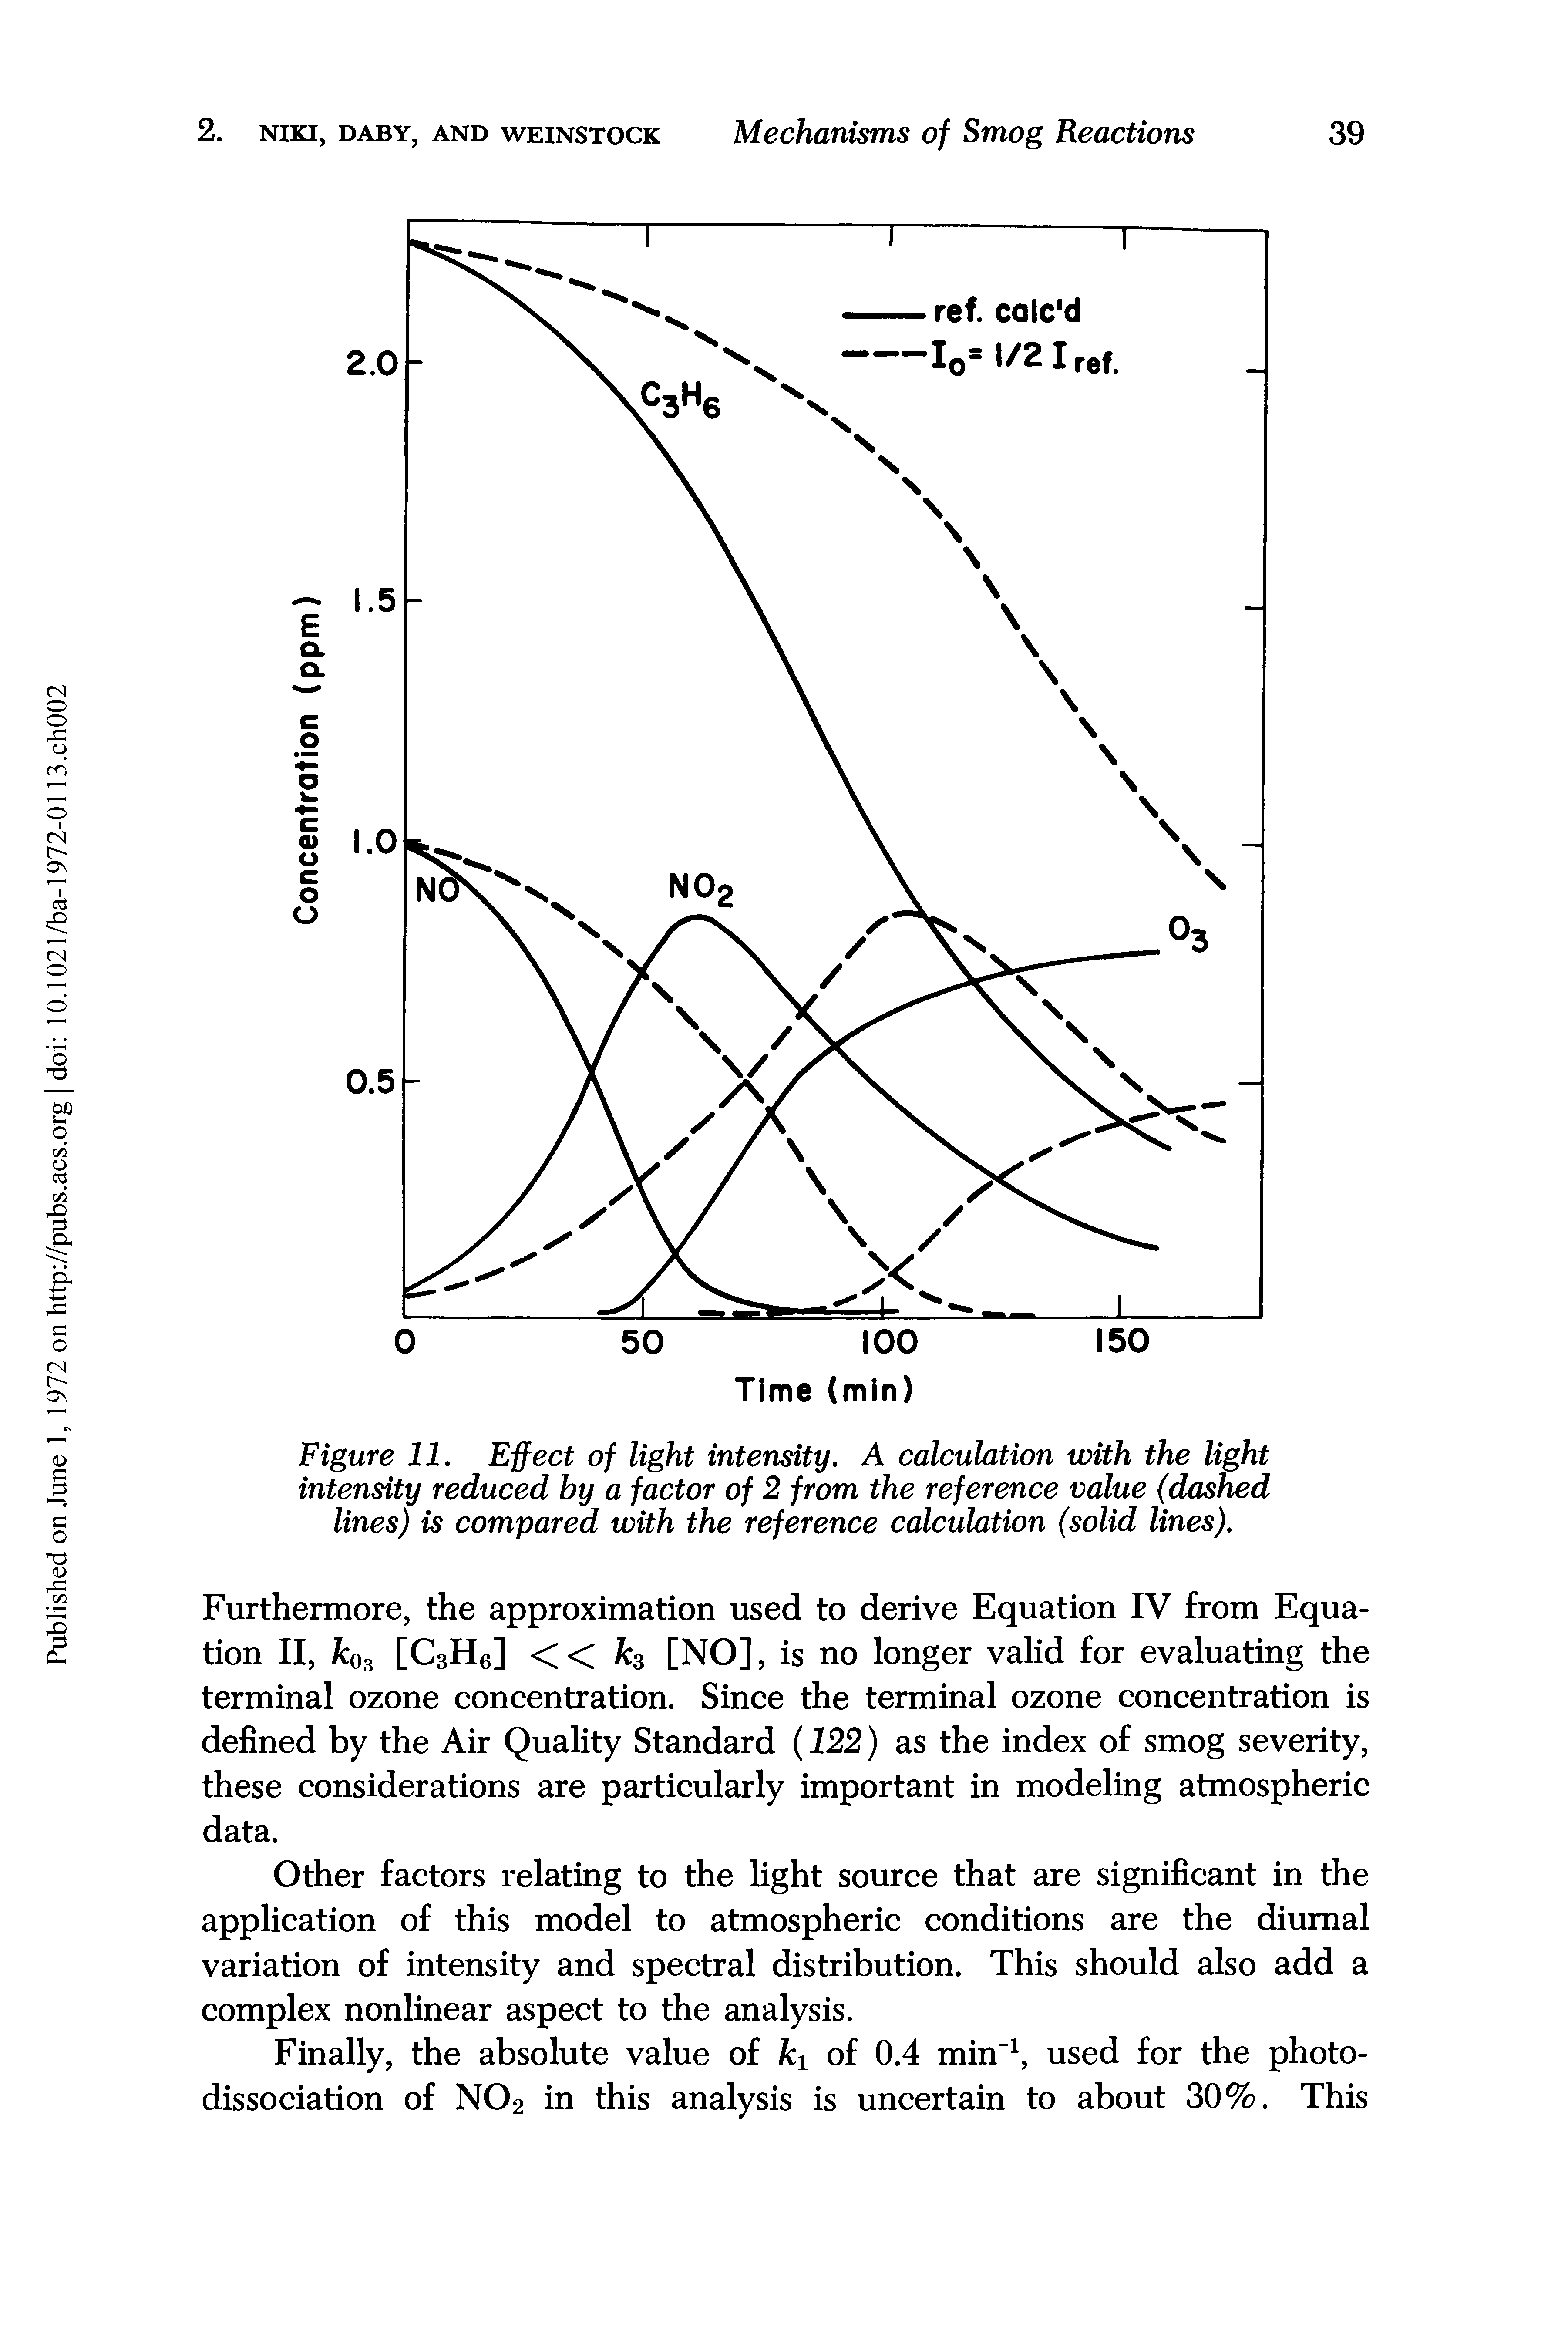 Figure 11. Effect of light intensity. A calculation with the light intensity reduced hy a factor of 2 from the reference value (dashed lines) is compared with the reference calculation (solid lines).